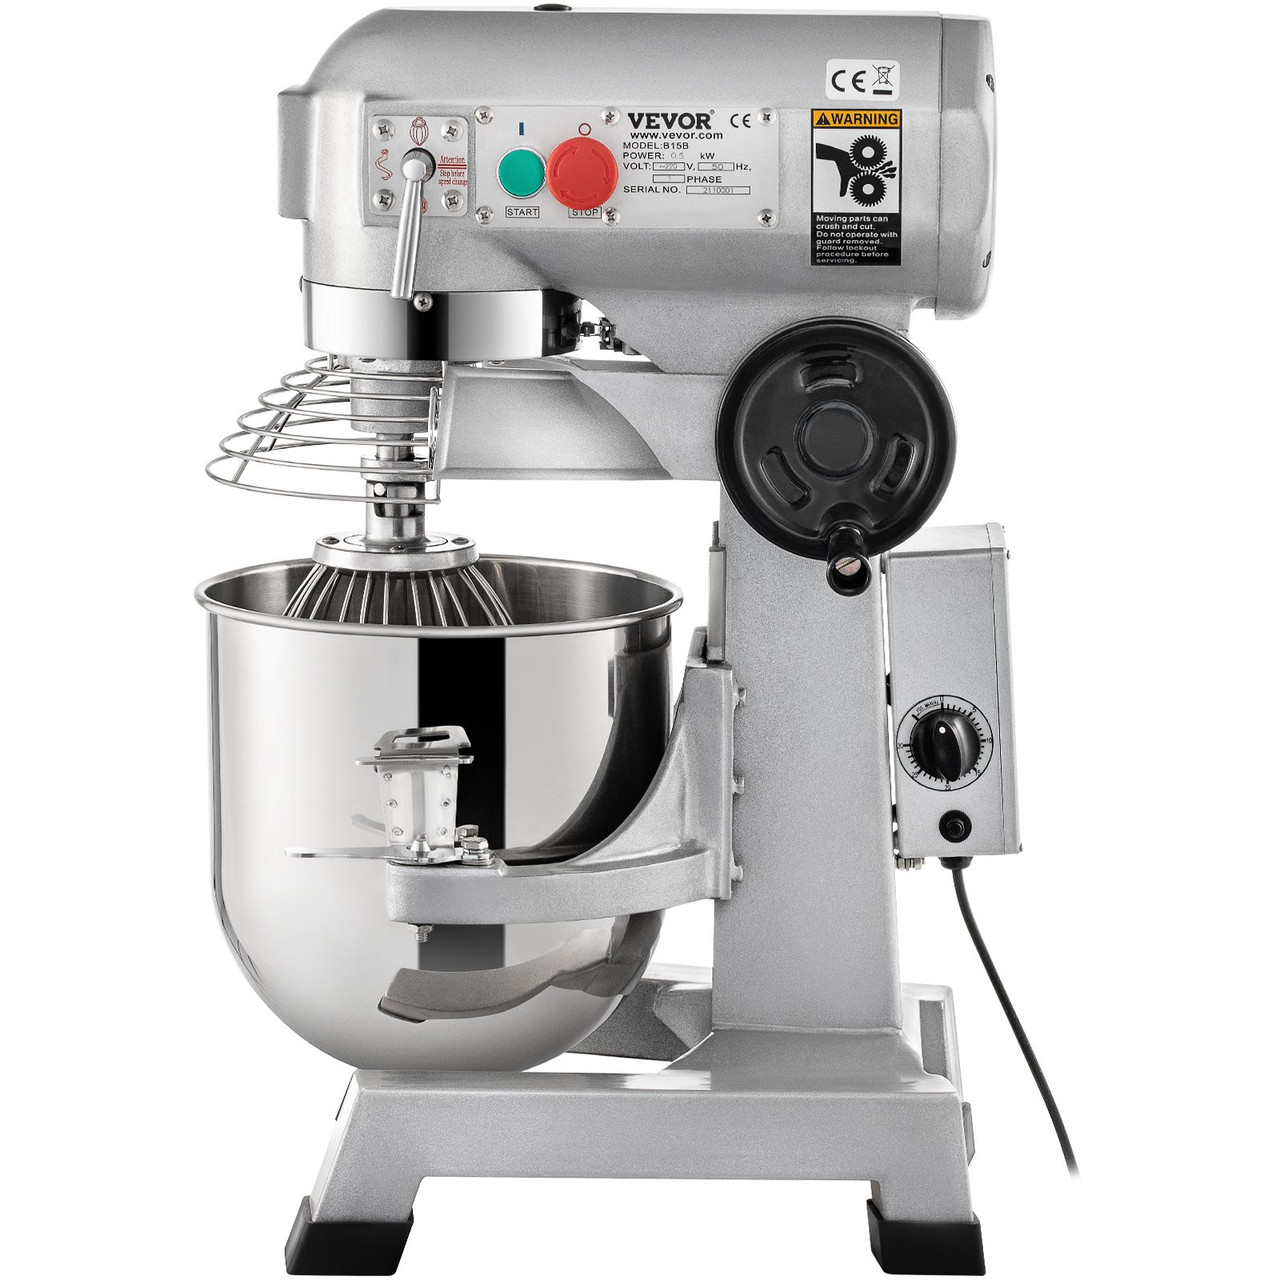 Commercial Food Mixer, 15Qt Commercial Mixer with Timing Function, 500W Stainless Steel Bowl Heavy Duty Electric Food Mixer Commercial with 3 Speeds